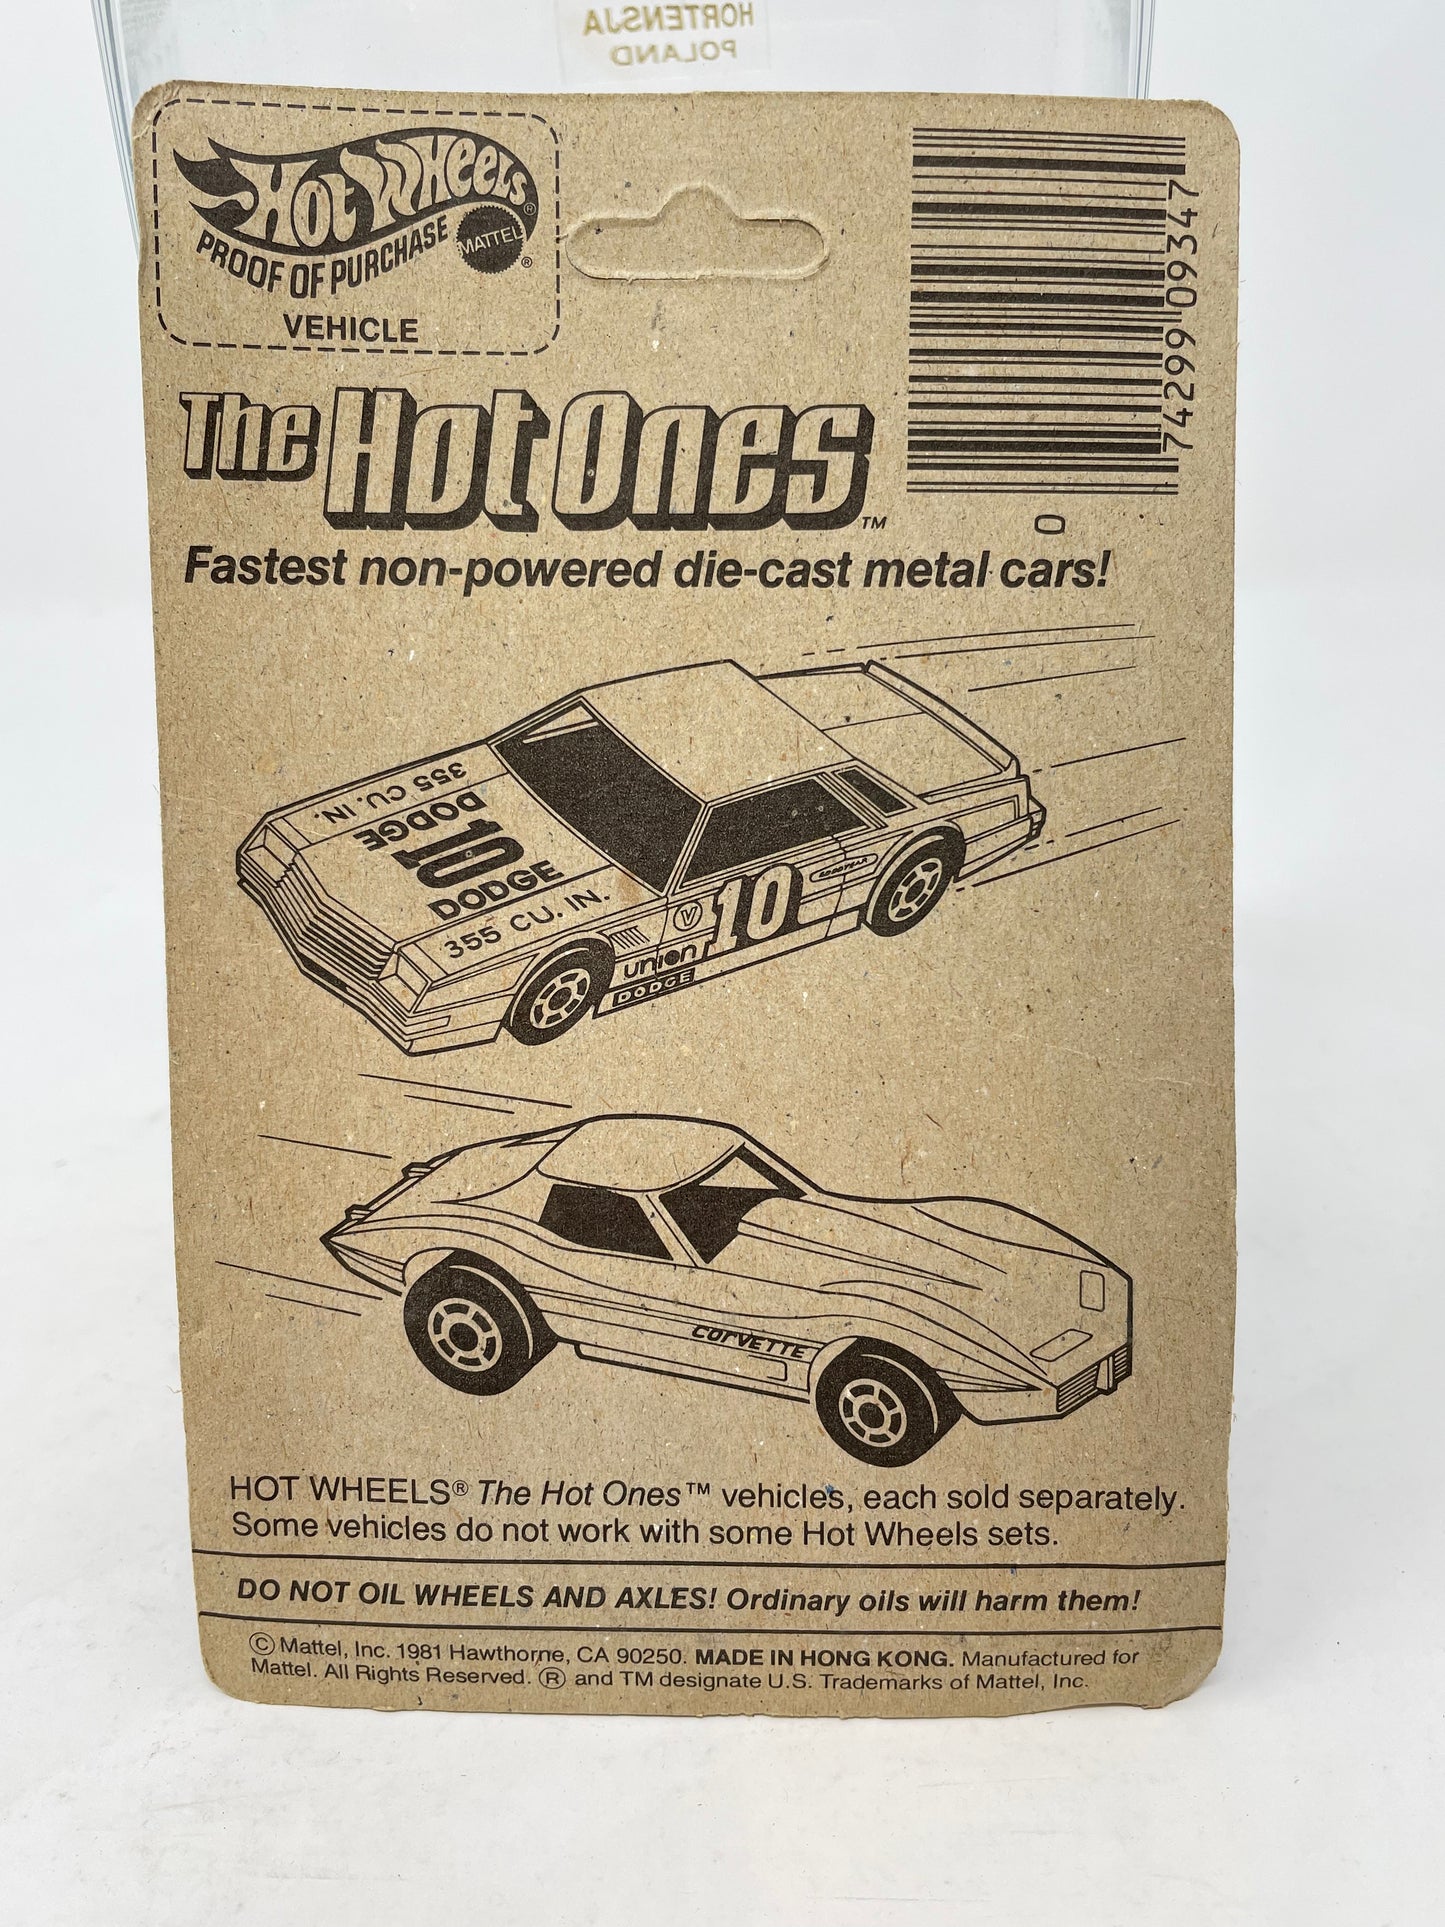 HOT WHEELS - THE HOT ONES - TURBO MUSTANG - UNPUNCHED- 1981 MATTEL